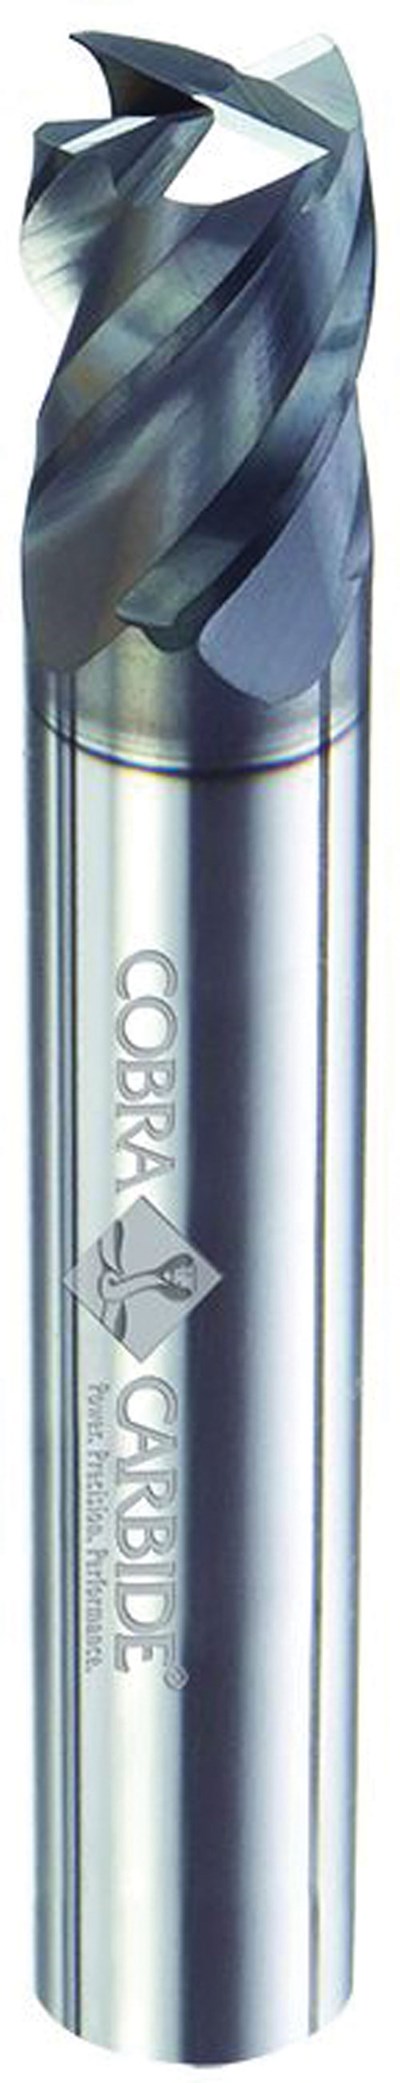 Cobra Carbide High-Feed End Mills Boost Productivity